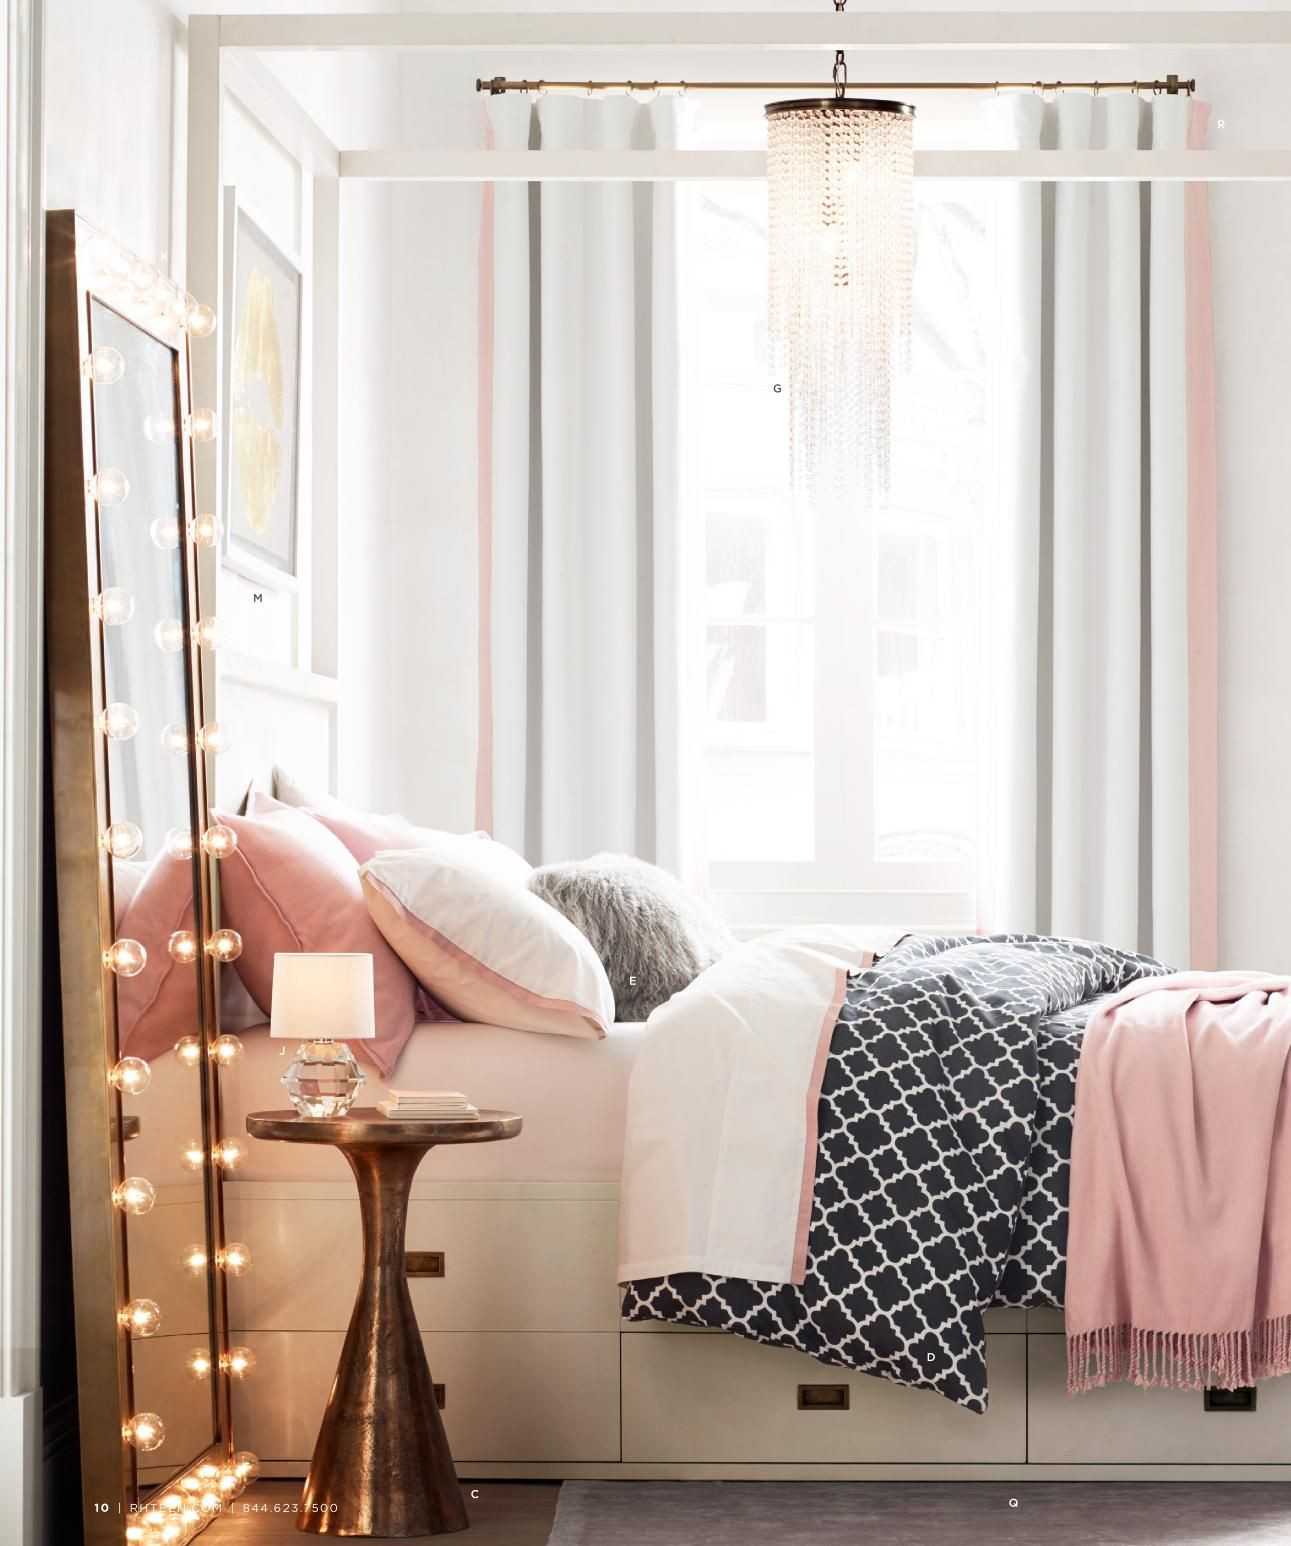 Rose Gold Bedroom Decor
 I am loving the new gold and rose mix